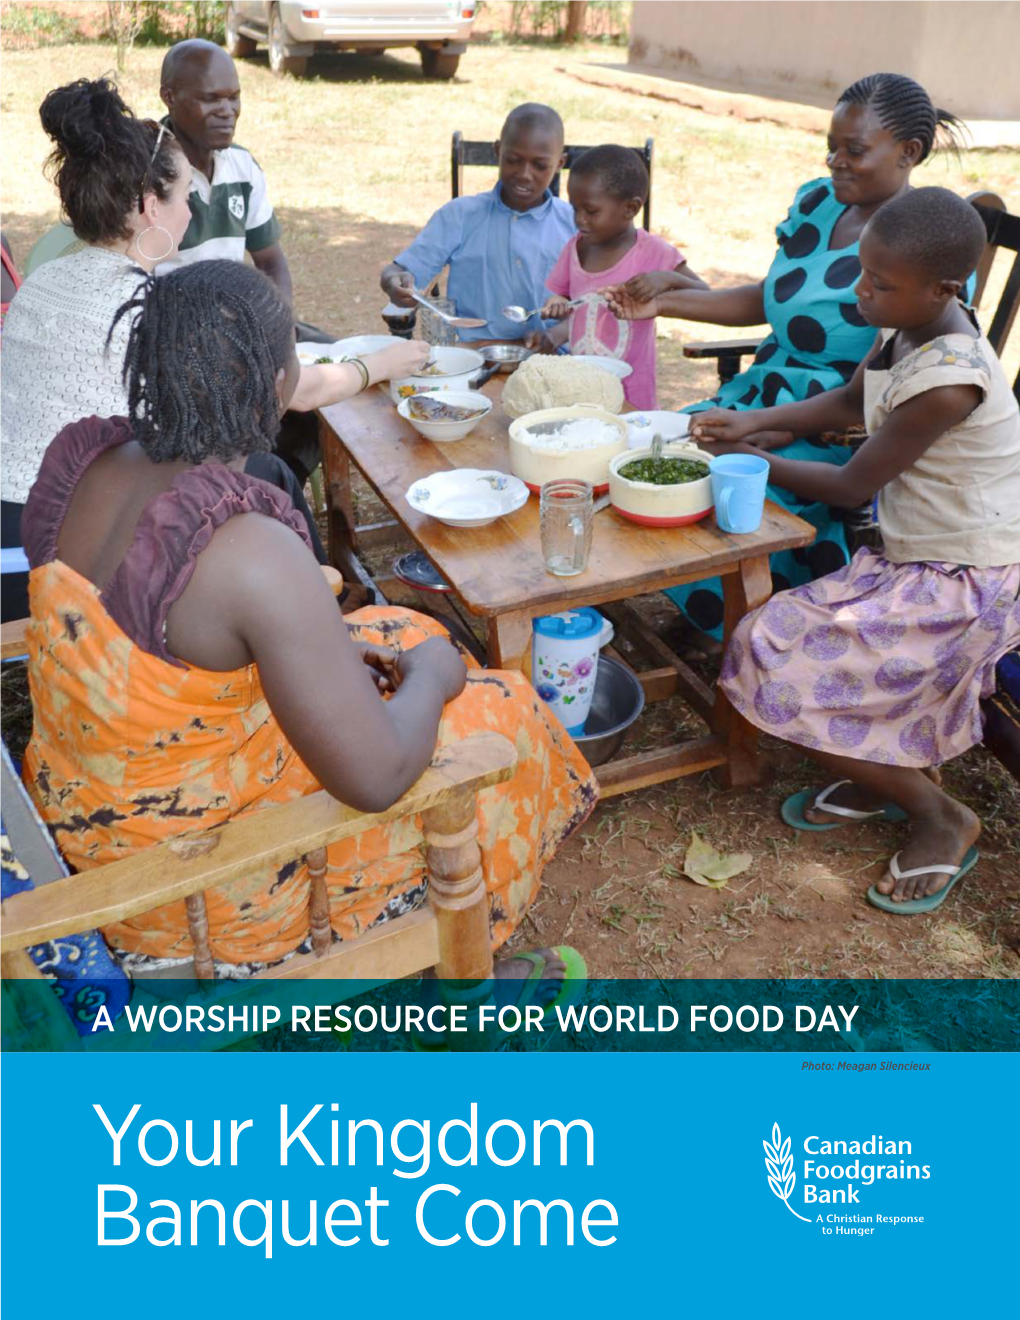 Your Kingdom Banquet Come CANADIAN FOODGRAINS BANK IS a PARTNERSHIP of 15 CANADIAN CHURCHES and CHURCH-BASED AGENCIES WORKING TOGETHER to END GLOBAL HUNGER BY